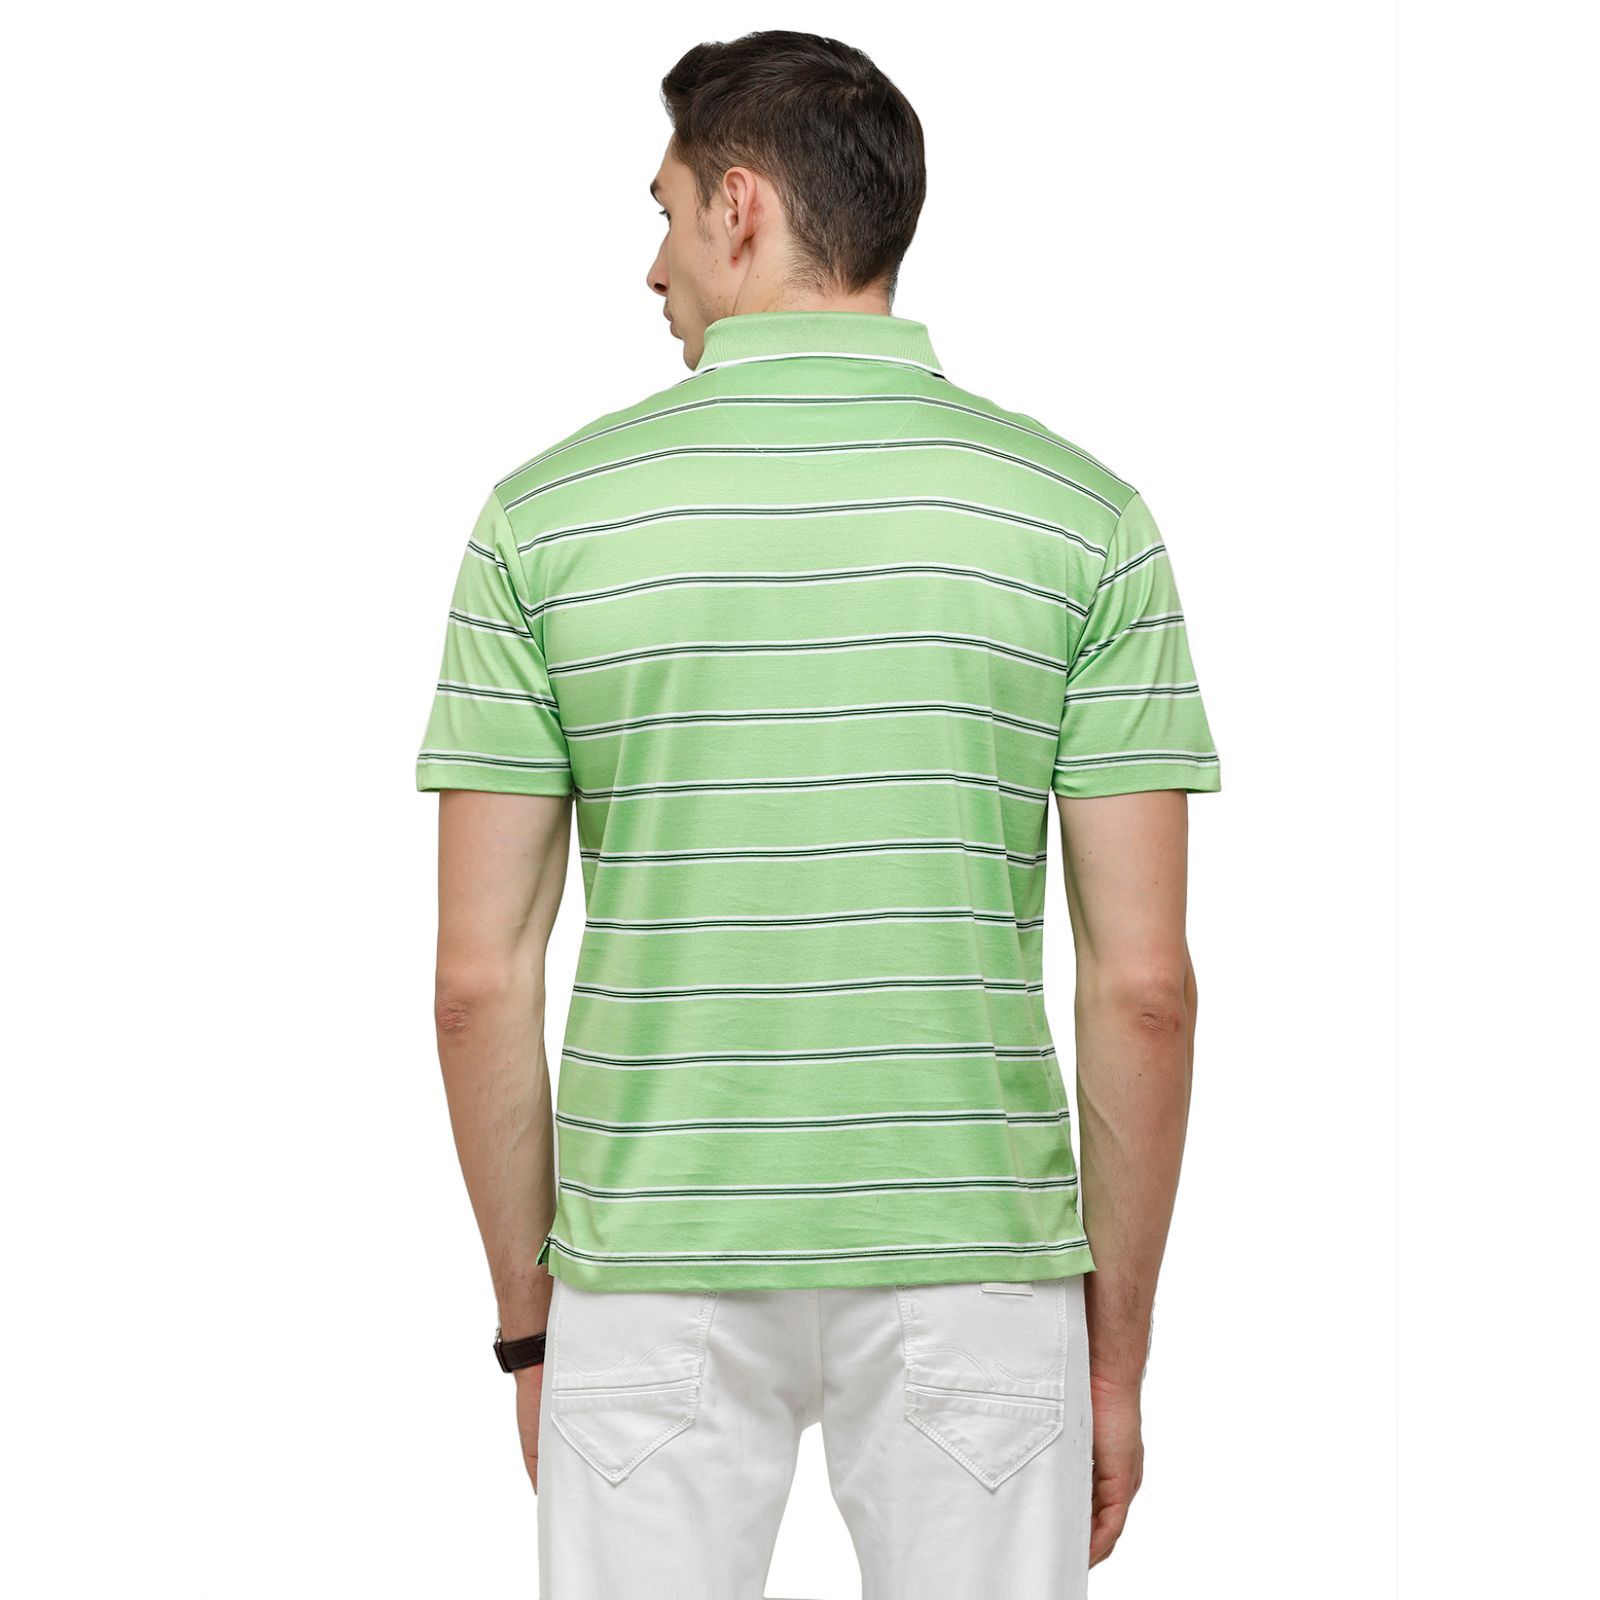 Classic Polo Men's Striped Authentic Fit Half Sleeve Premium Light Green Stripe T-Shirt - Ultimo - 255 A T-Shirt Classic Polo 